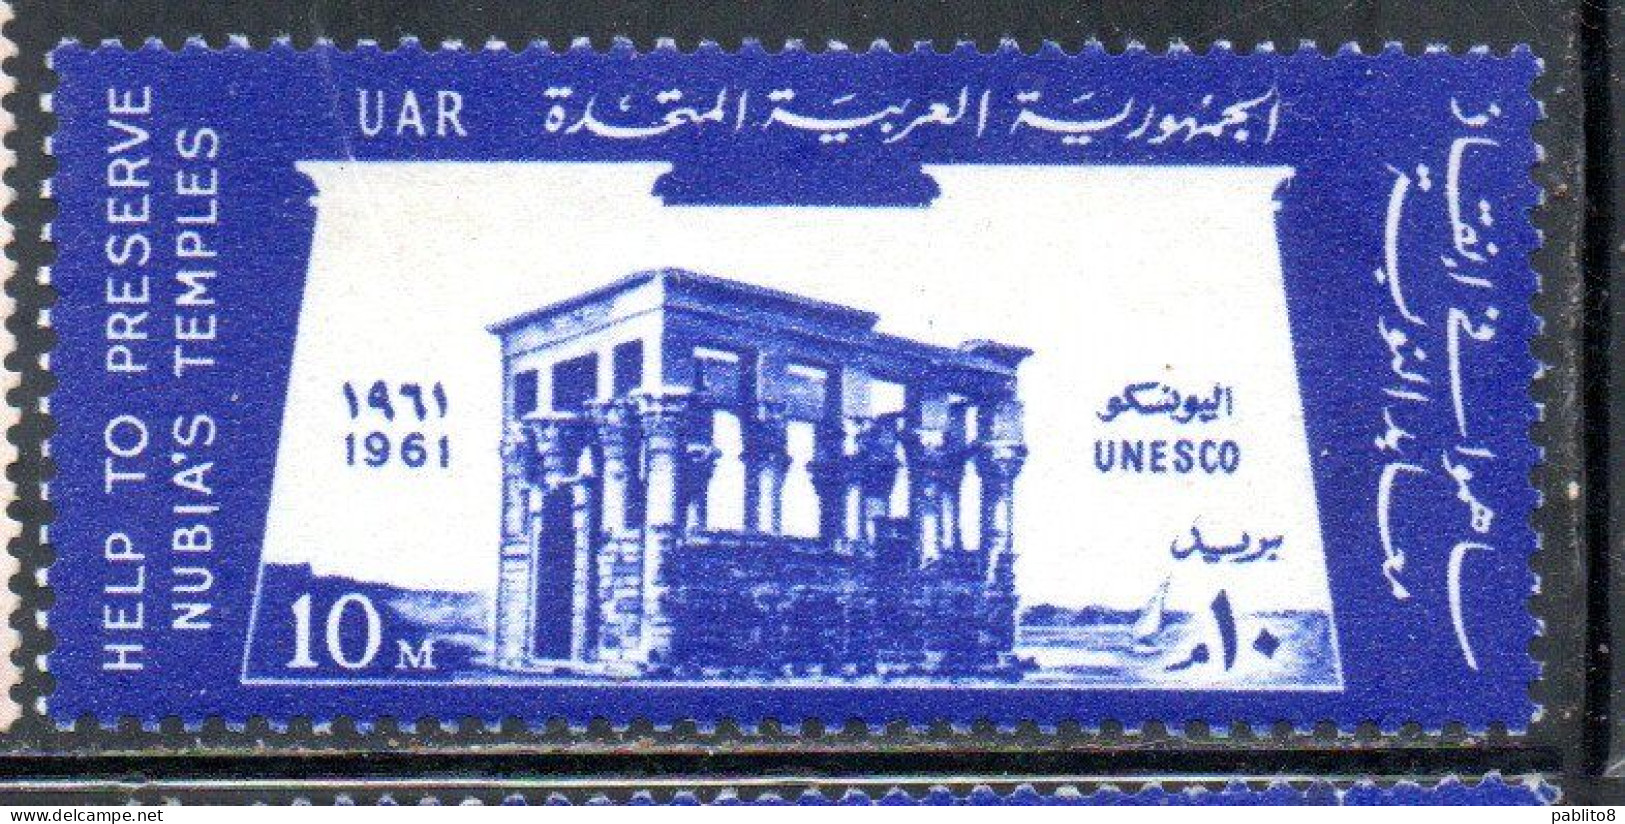 UAR EGYPT EGITTO 1961 14th ANNIVERSARY OF UNESCO AND SAFEGUARDINGS THE MONUMENTS OF NUBIA 10m MNH - Neufs